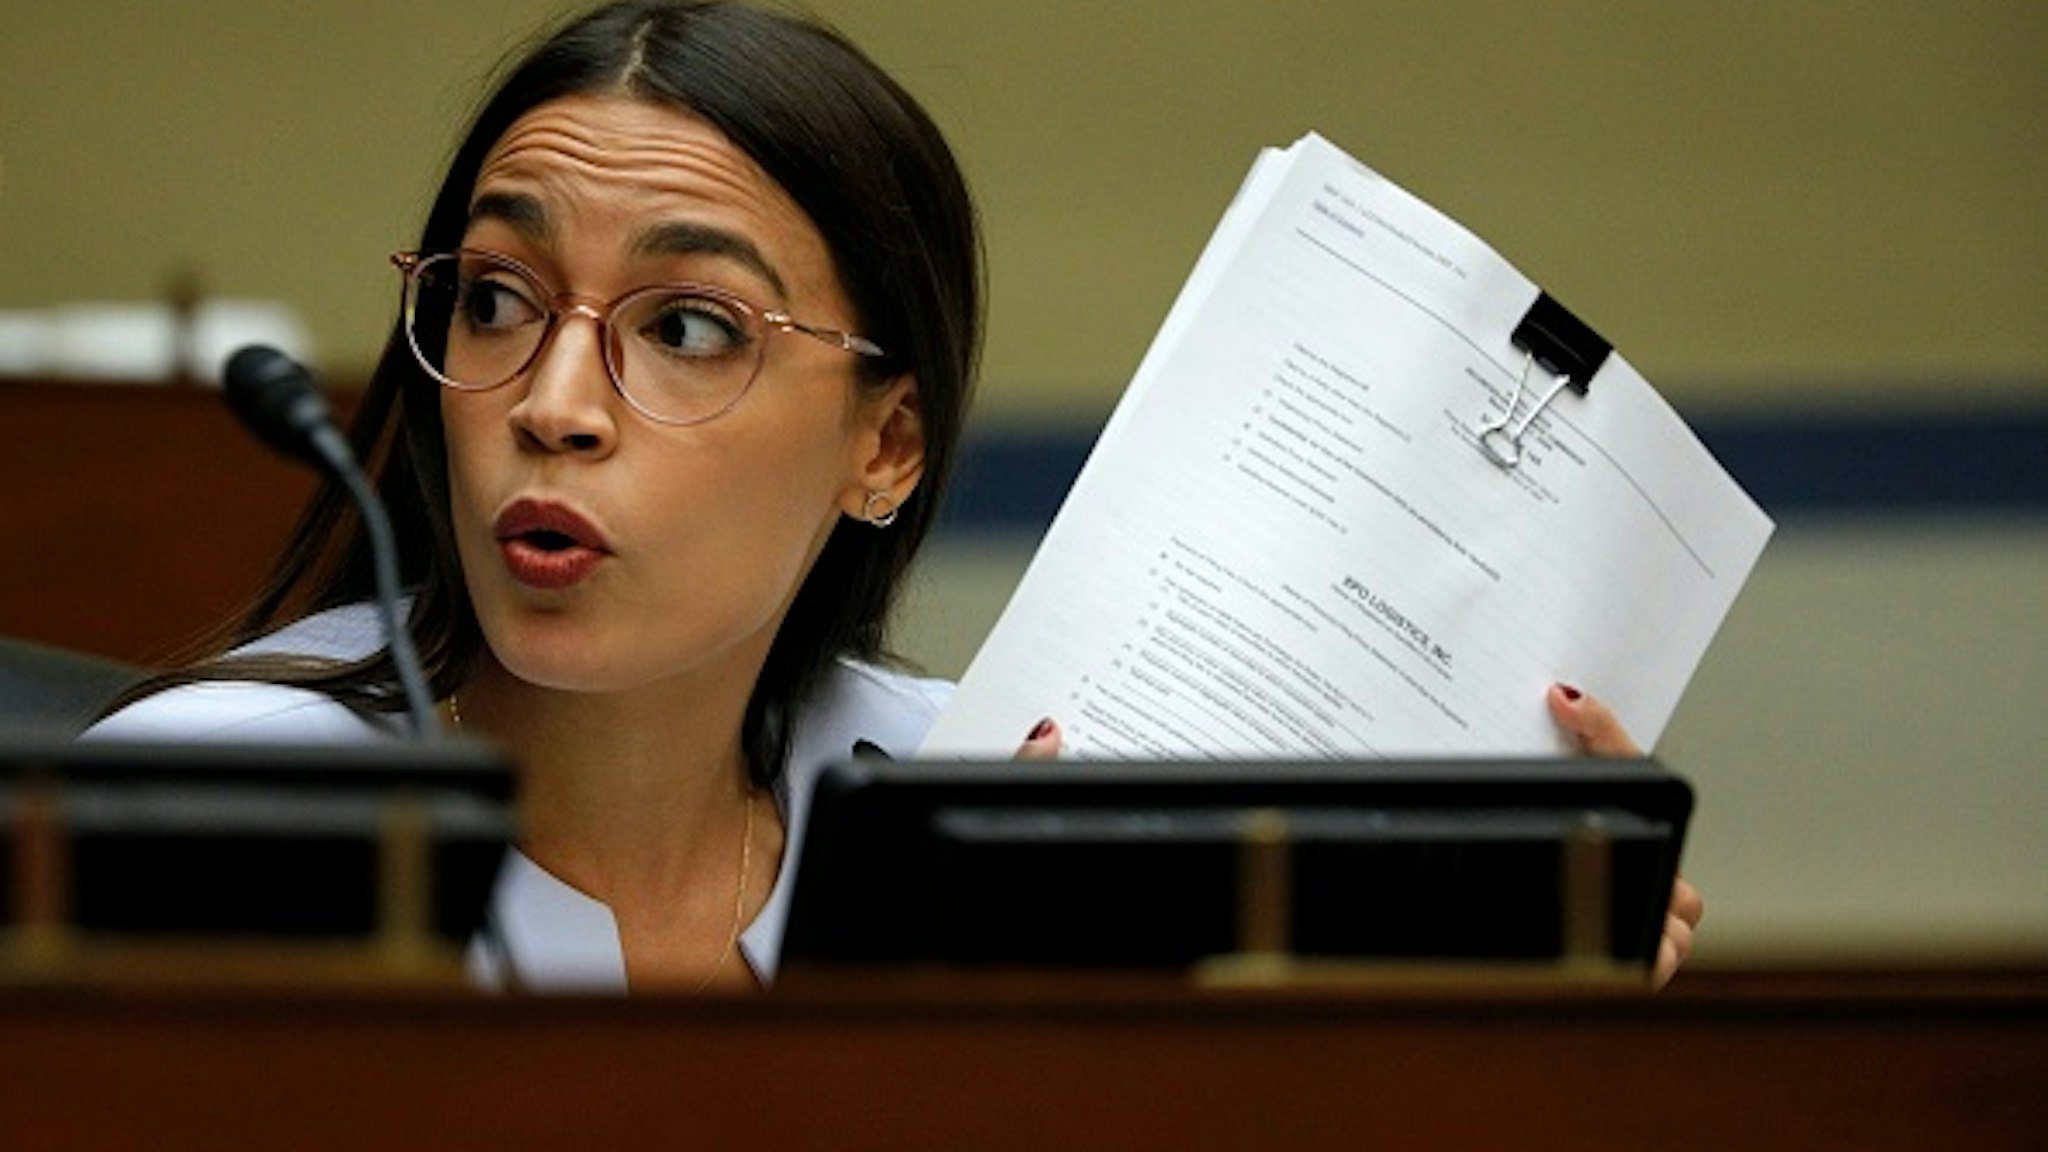 WASHINGTON, DC - AUGUST 24: Rep. Alexandria Ocasio-Cortez (D-NY) asks a question as U.S. Postmaster General Louis DeJoy testifies at a House Oversight and Reform Committee hearing in the Rayburn House Office Building on August 24, 2020 on Capitol Hill in Washington, DC. The committee is holding a hearing on "Protecting the Timely Delivery of Mail, Medicine, and Mail-in Ballots."